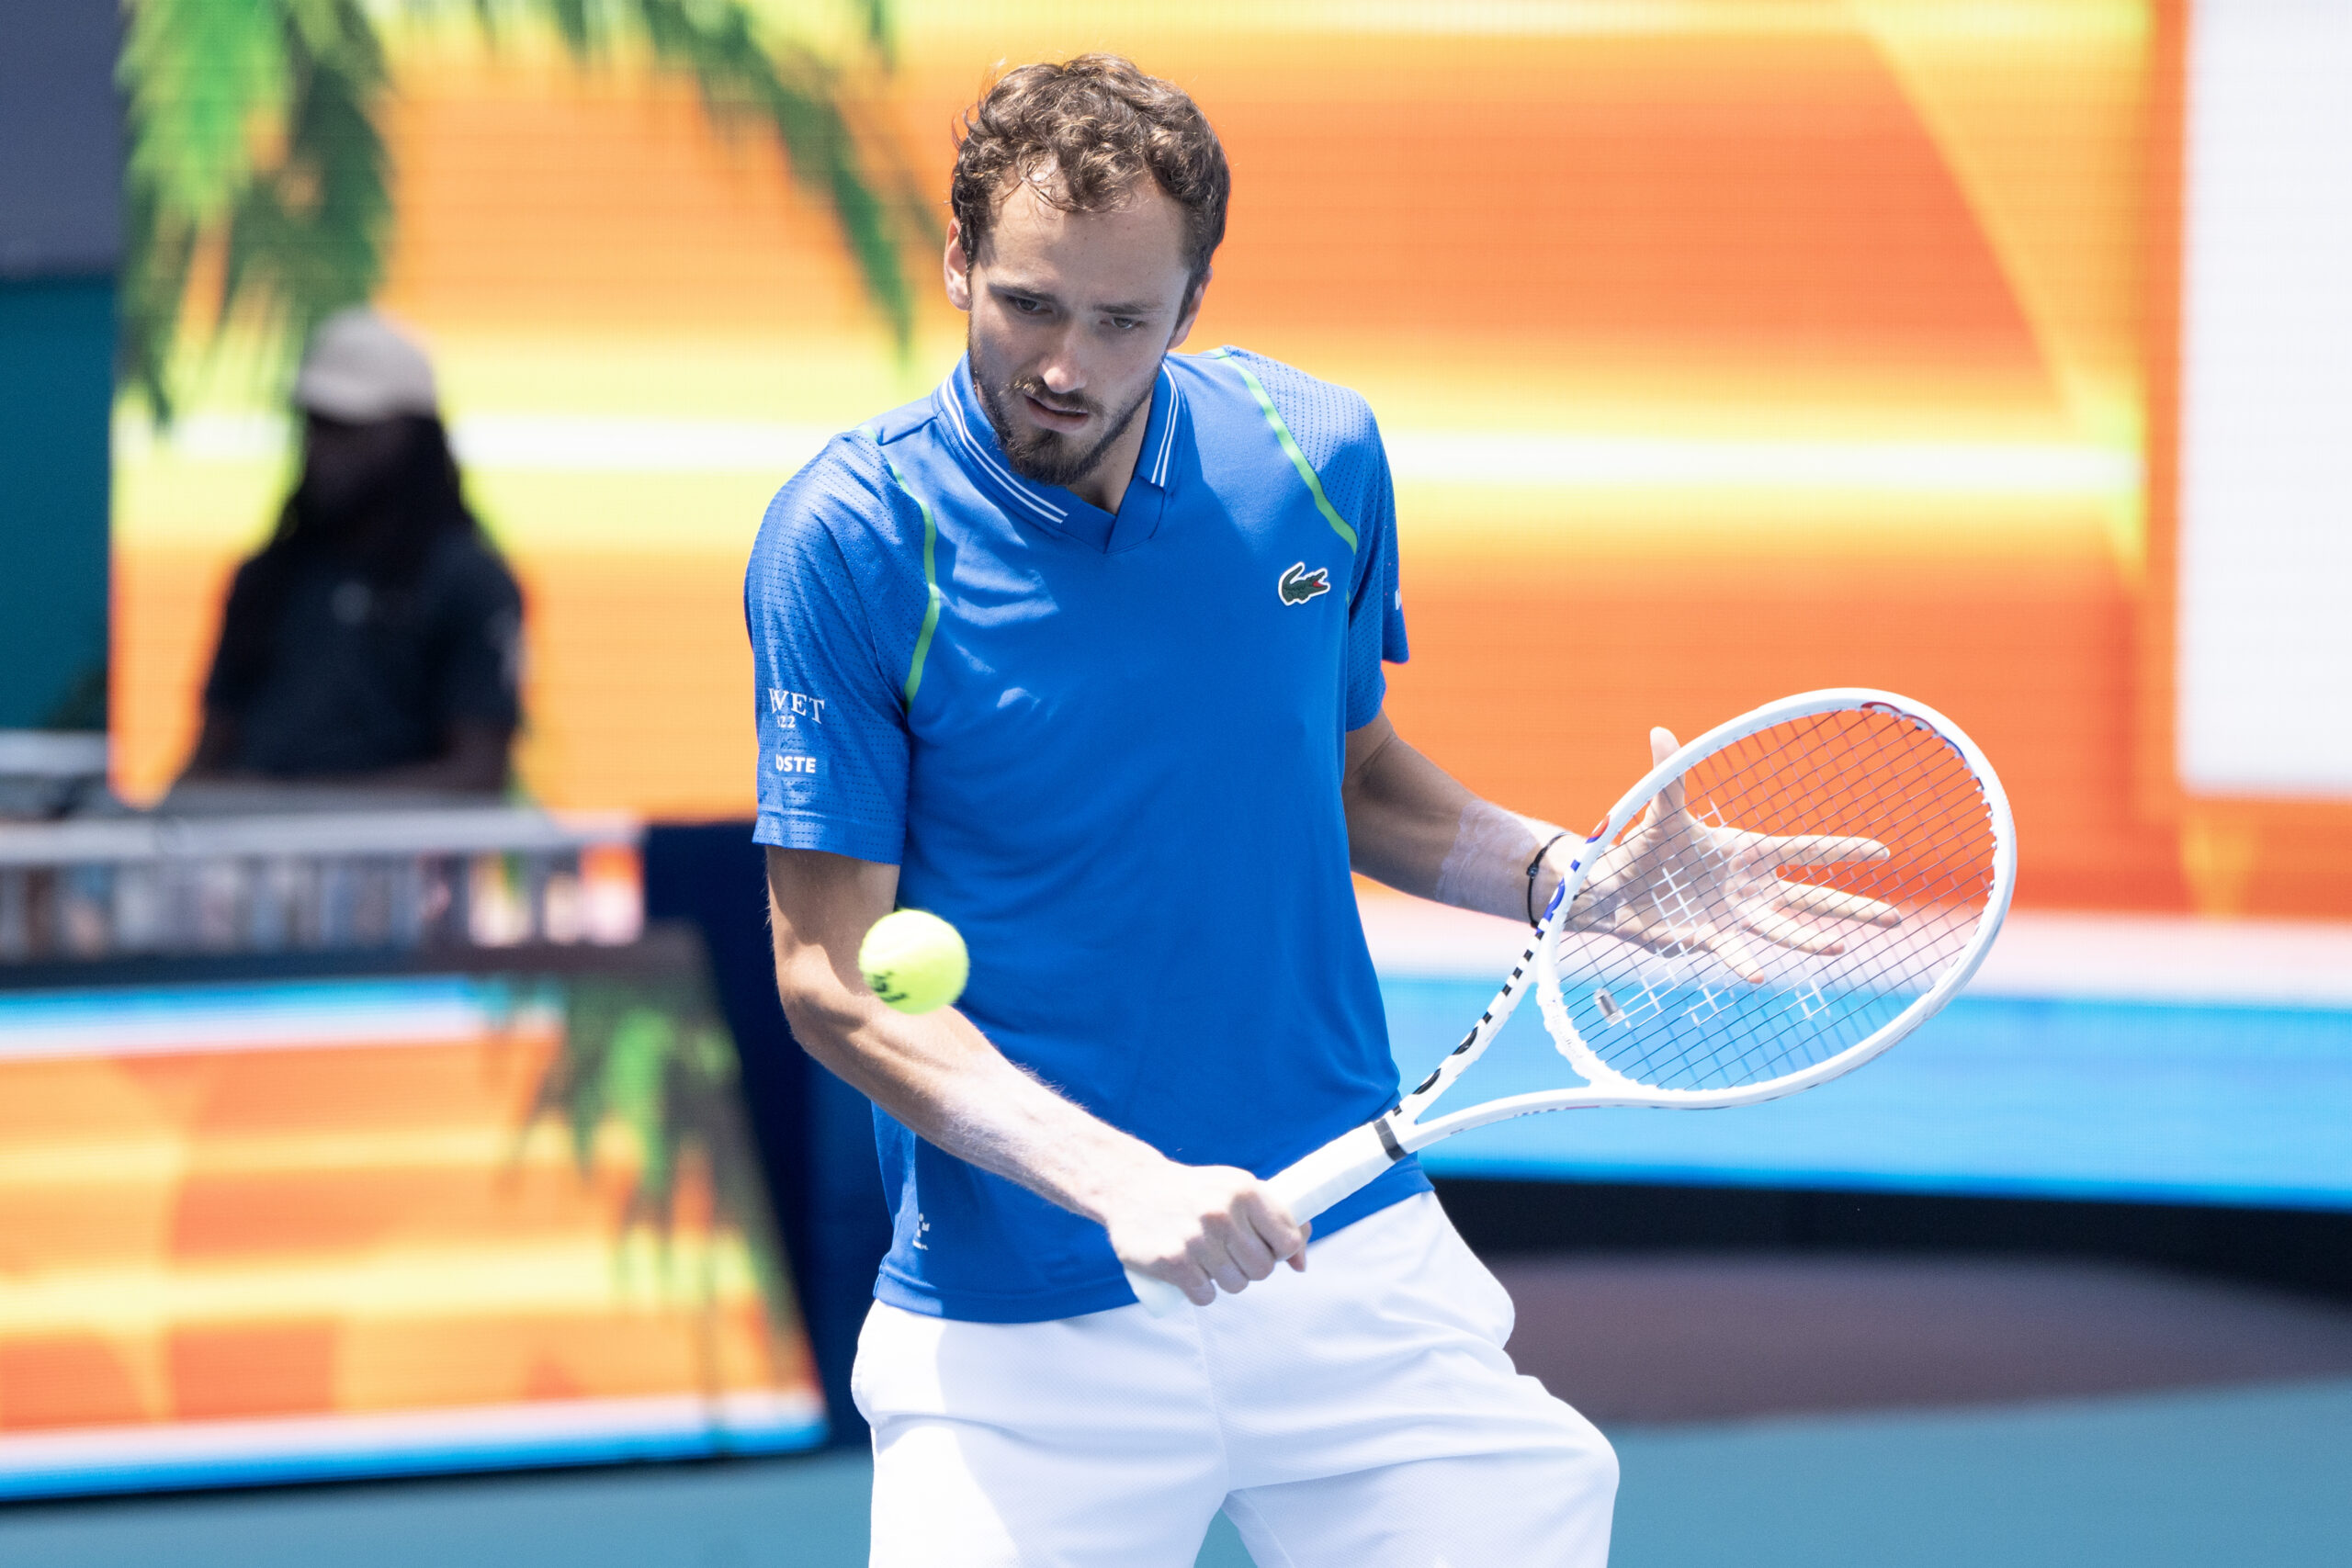 Daniil Medvedev volleys during his match with Chris Eubanks on March 30, 2023 in Miami Gardens, Florida.